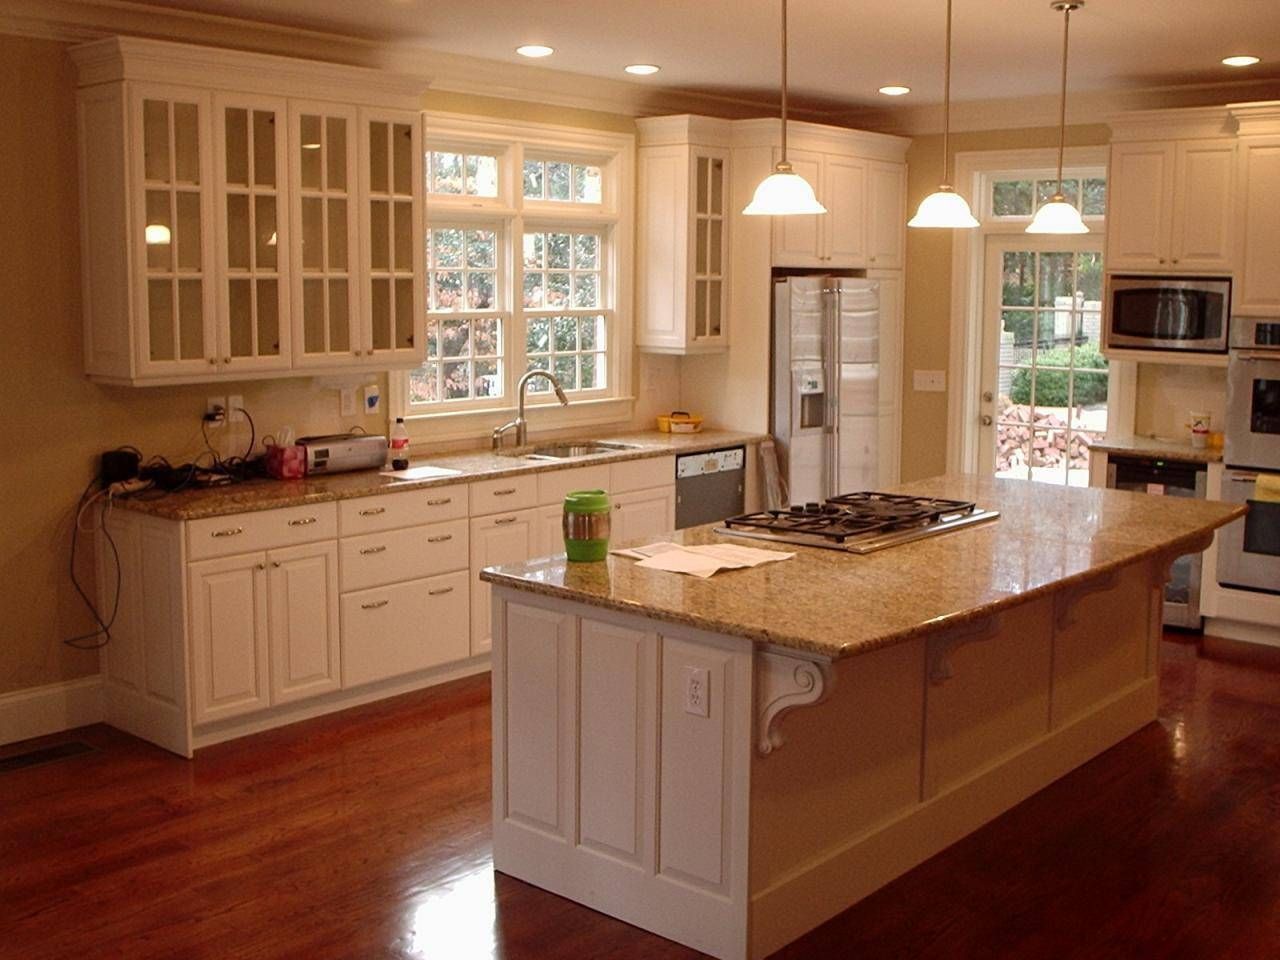 Kitchen Lighting: Chrome Dome Pendant Lights Countertop Microwave Throughout Lights Over Breakfast Bar (View 11 of 15)